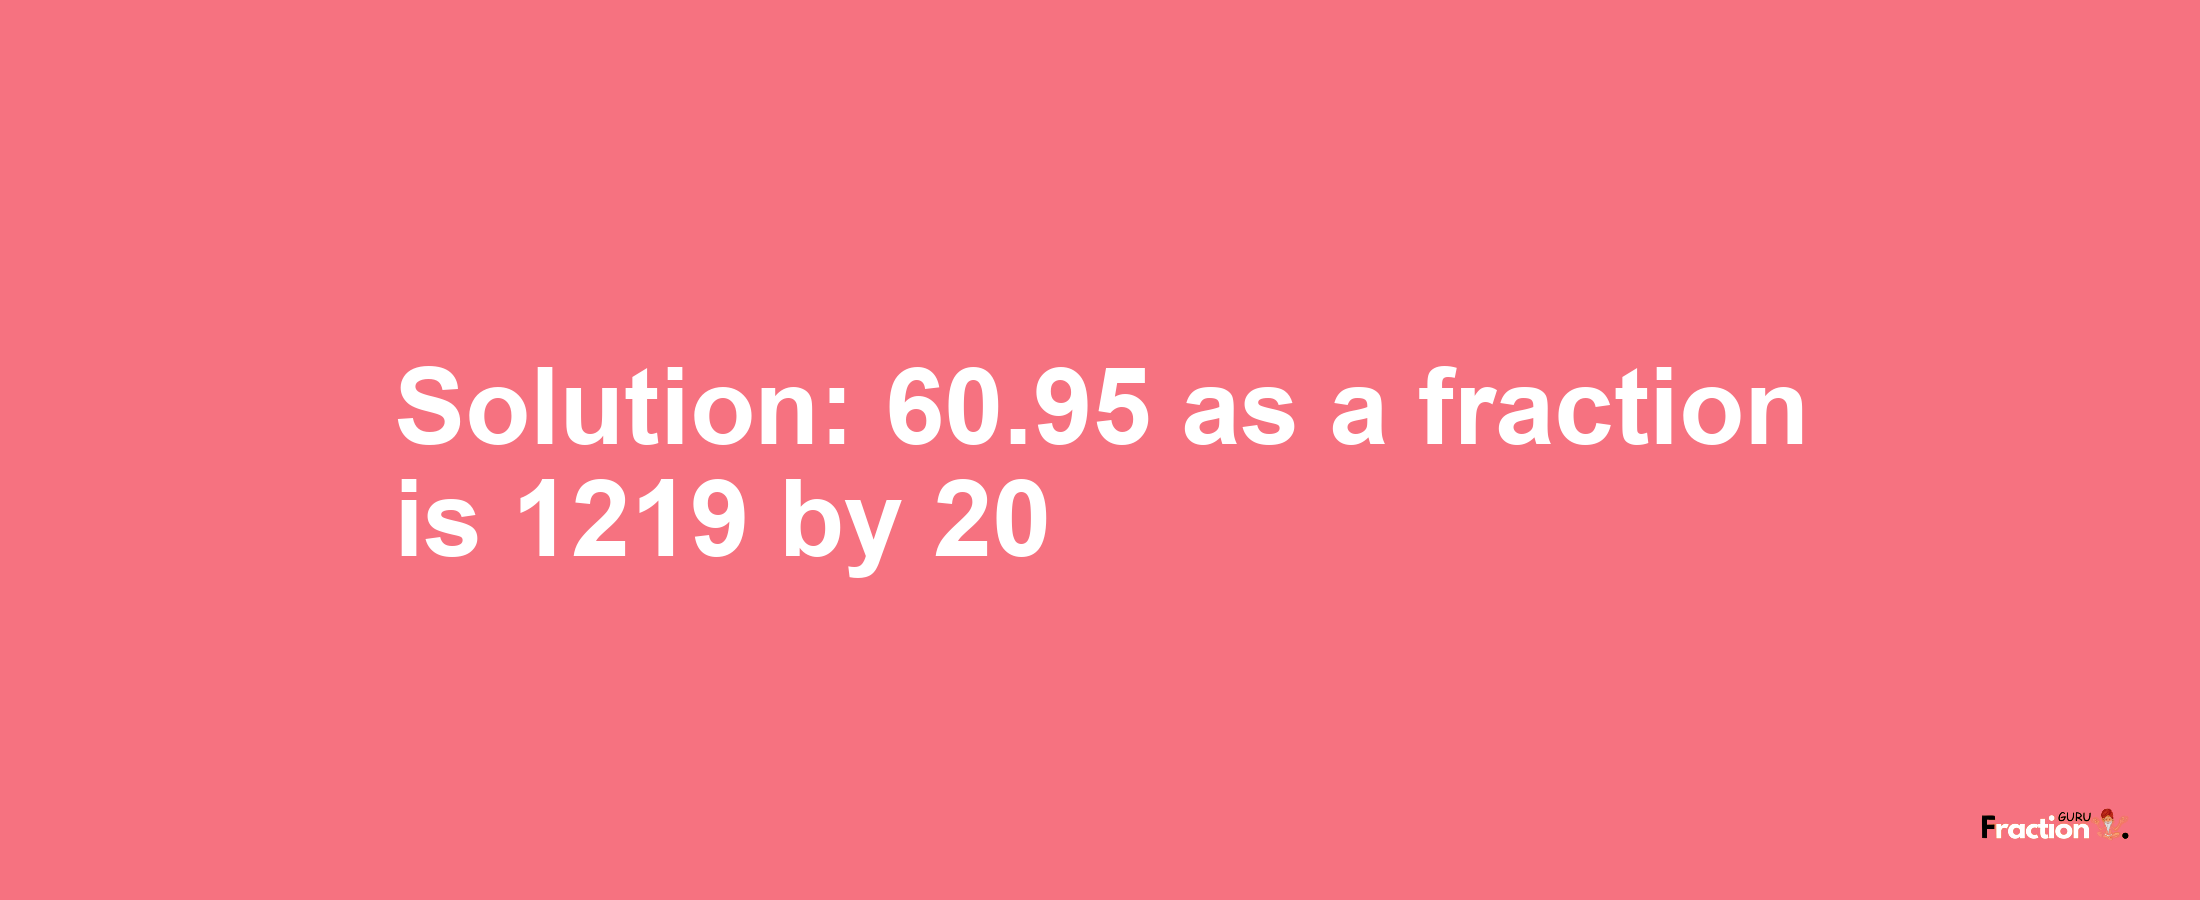 Solution:60.95 as a fraction is 1219/20